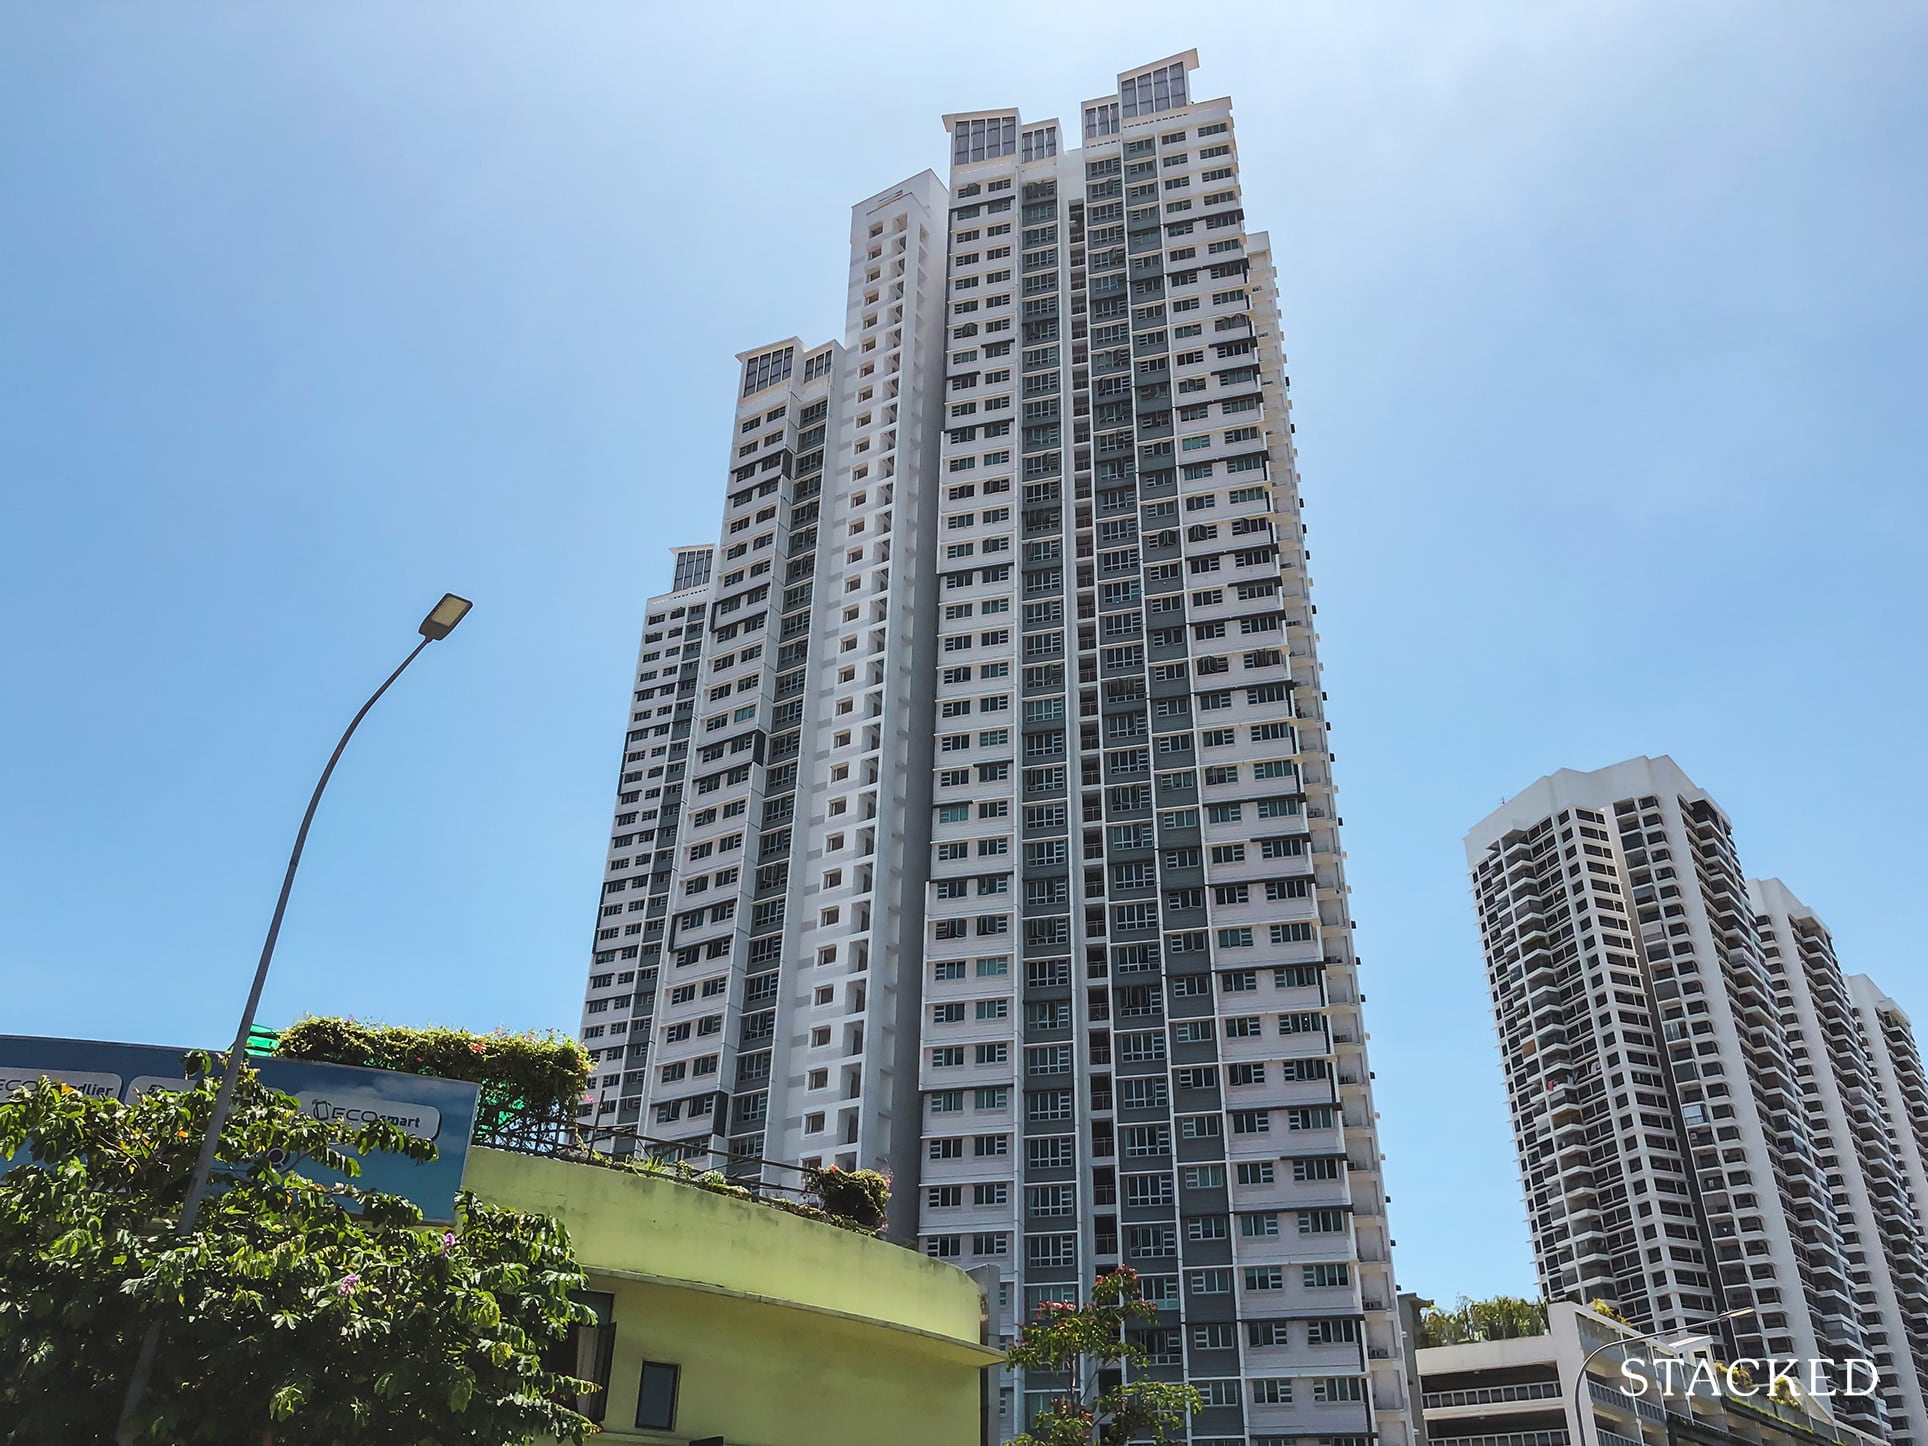 Should I Still Keep My HDB Flat If I’m Buying A Private Property? Here Are 5 Factors To Consider